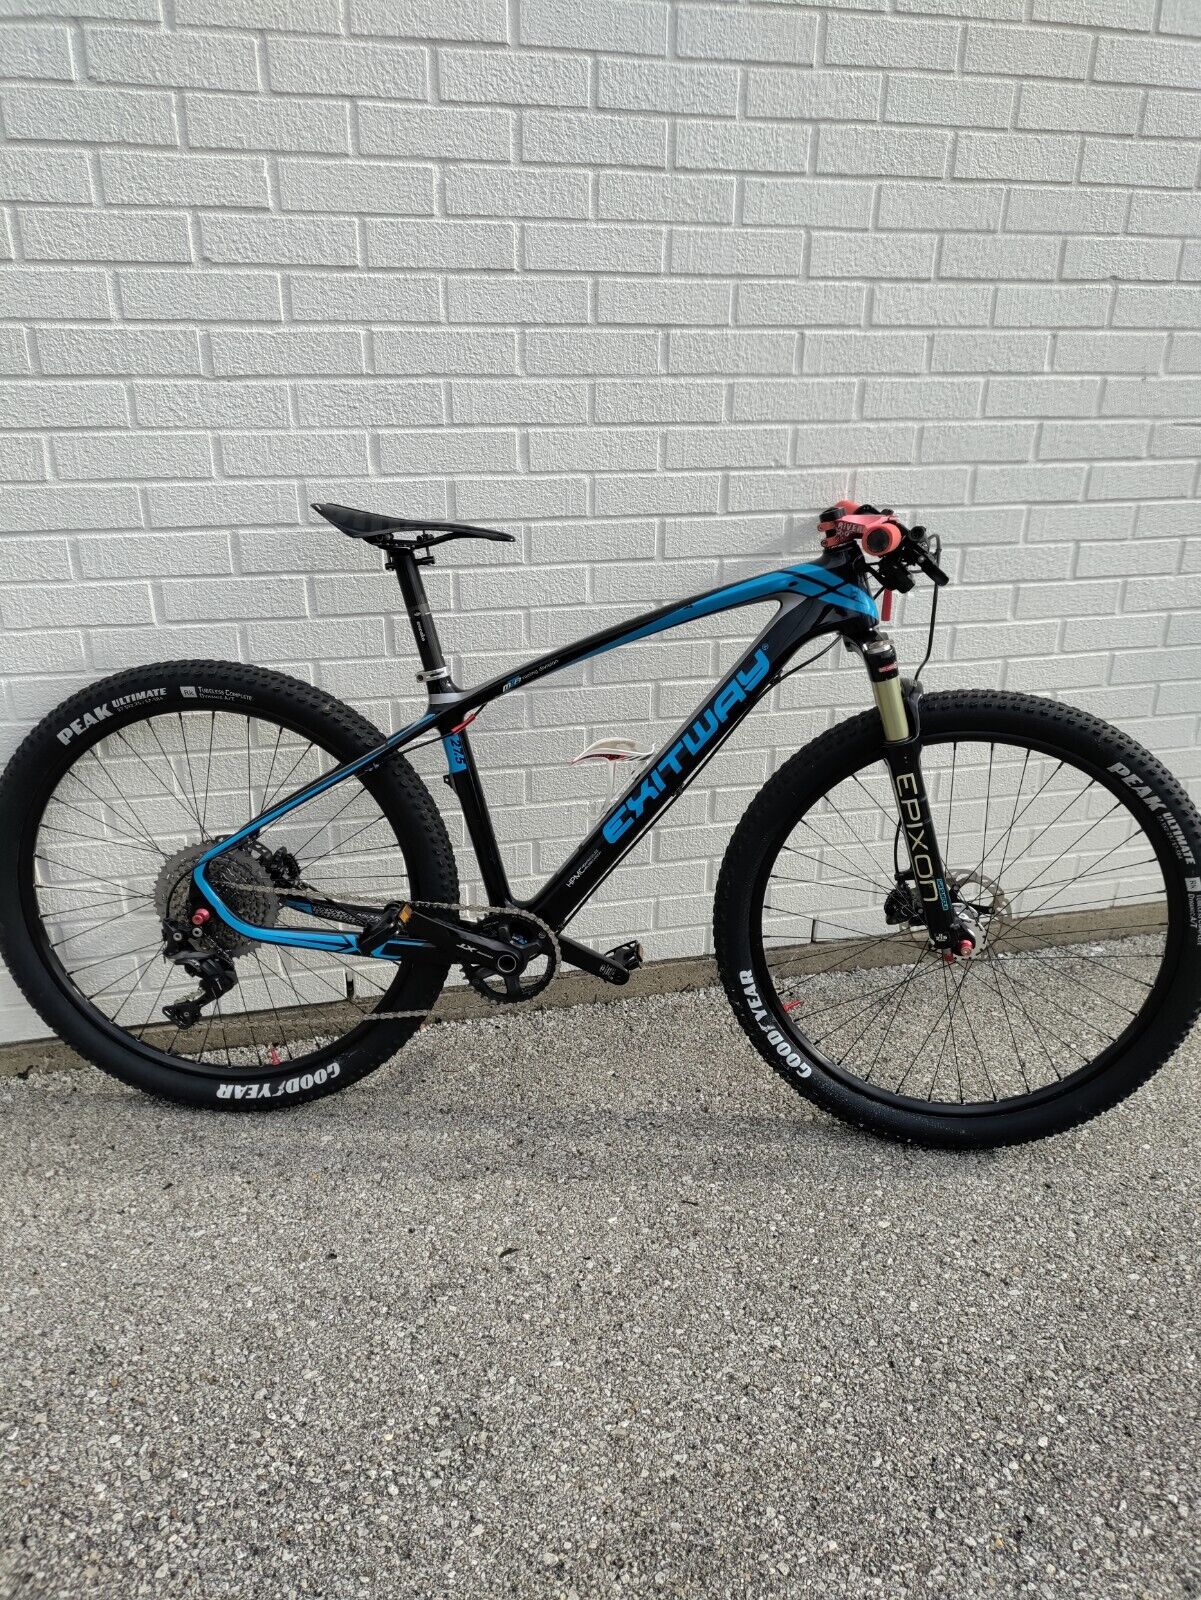 Exitway Overfly Carbon Mountain Bike - Taking Offers!